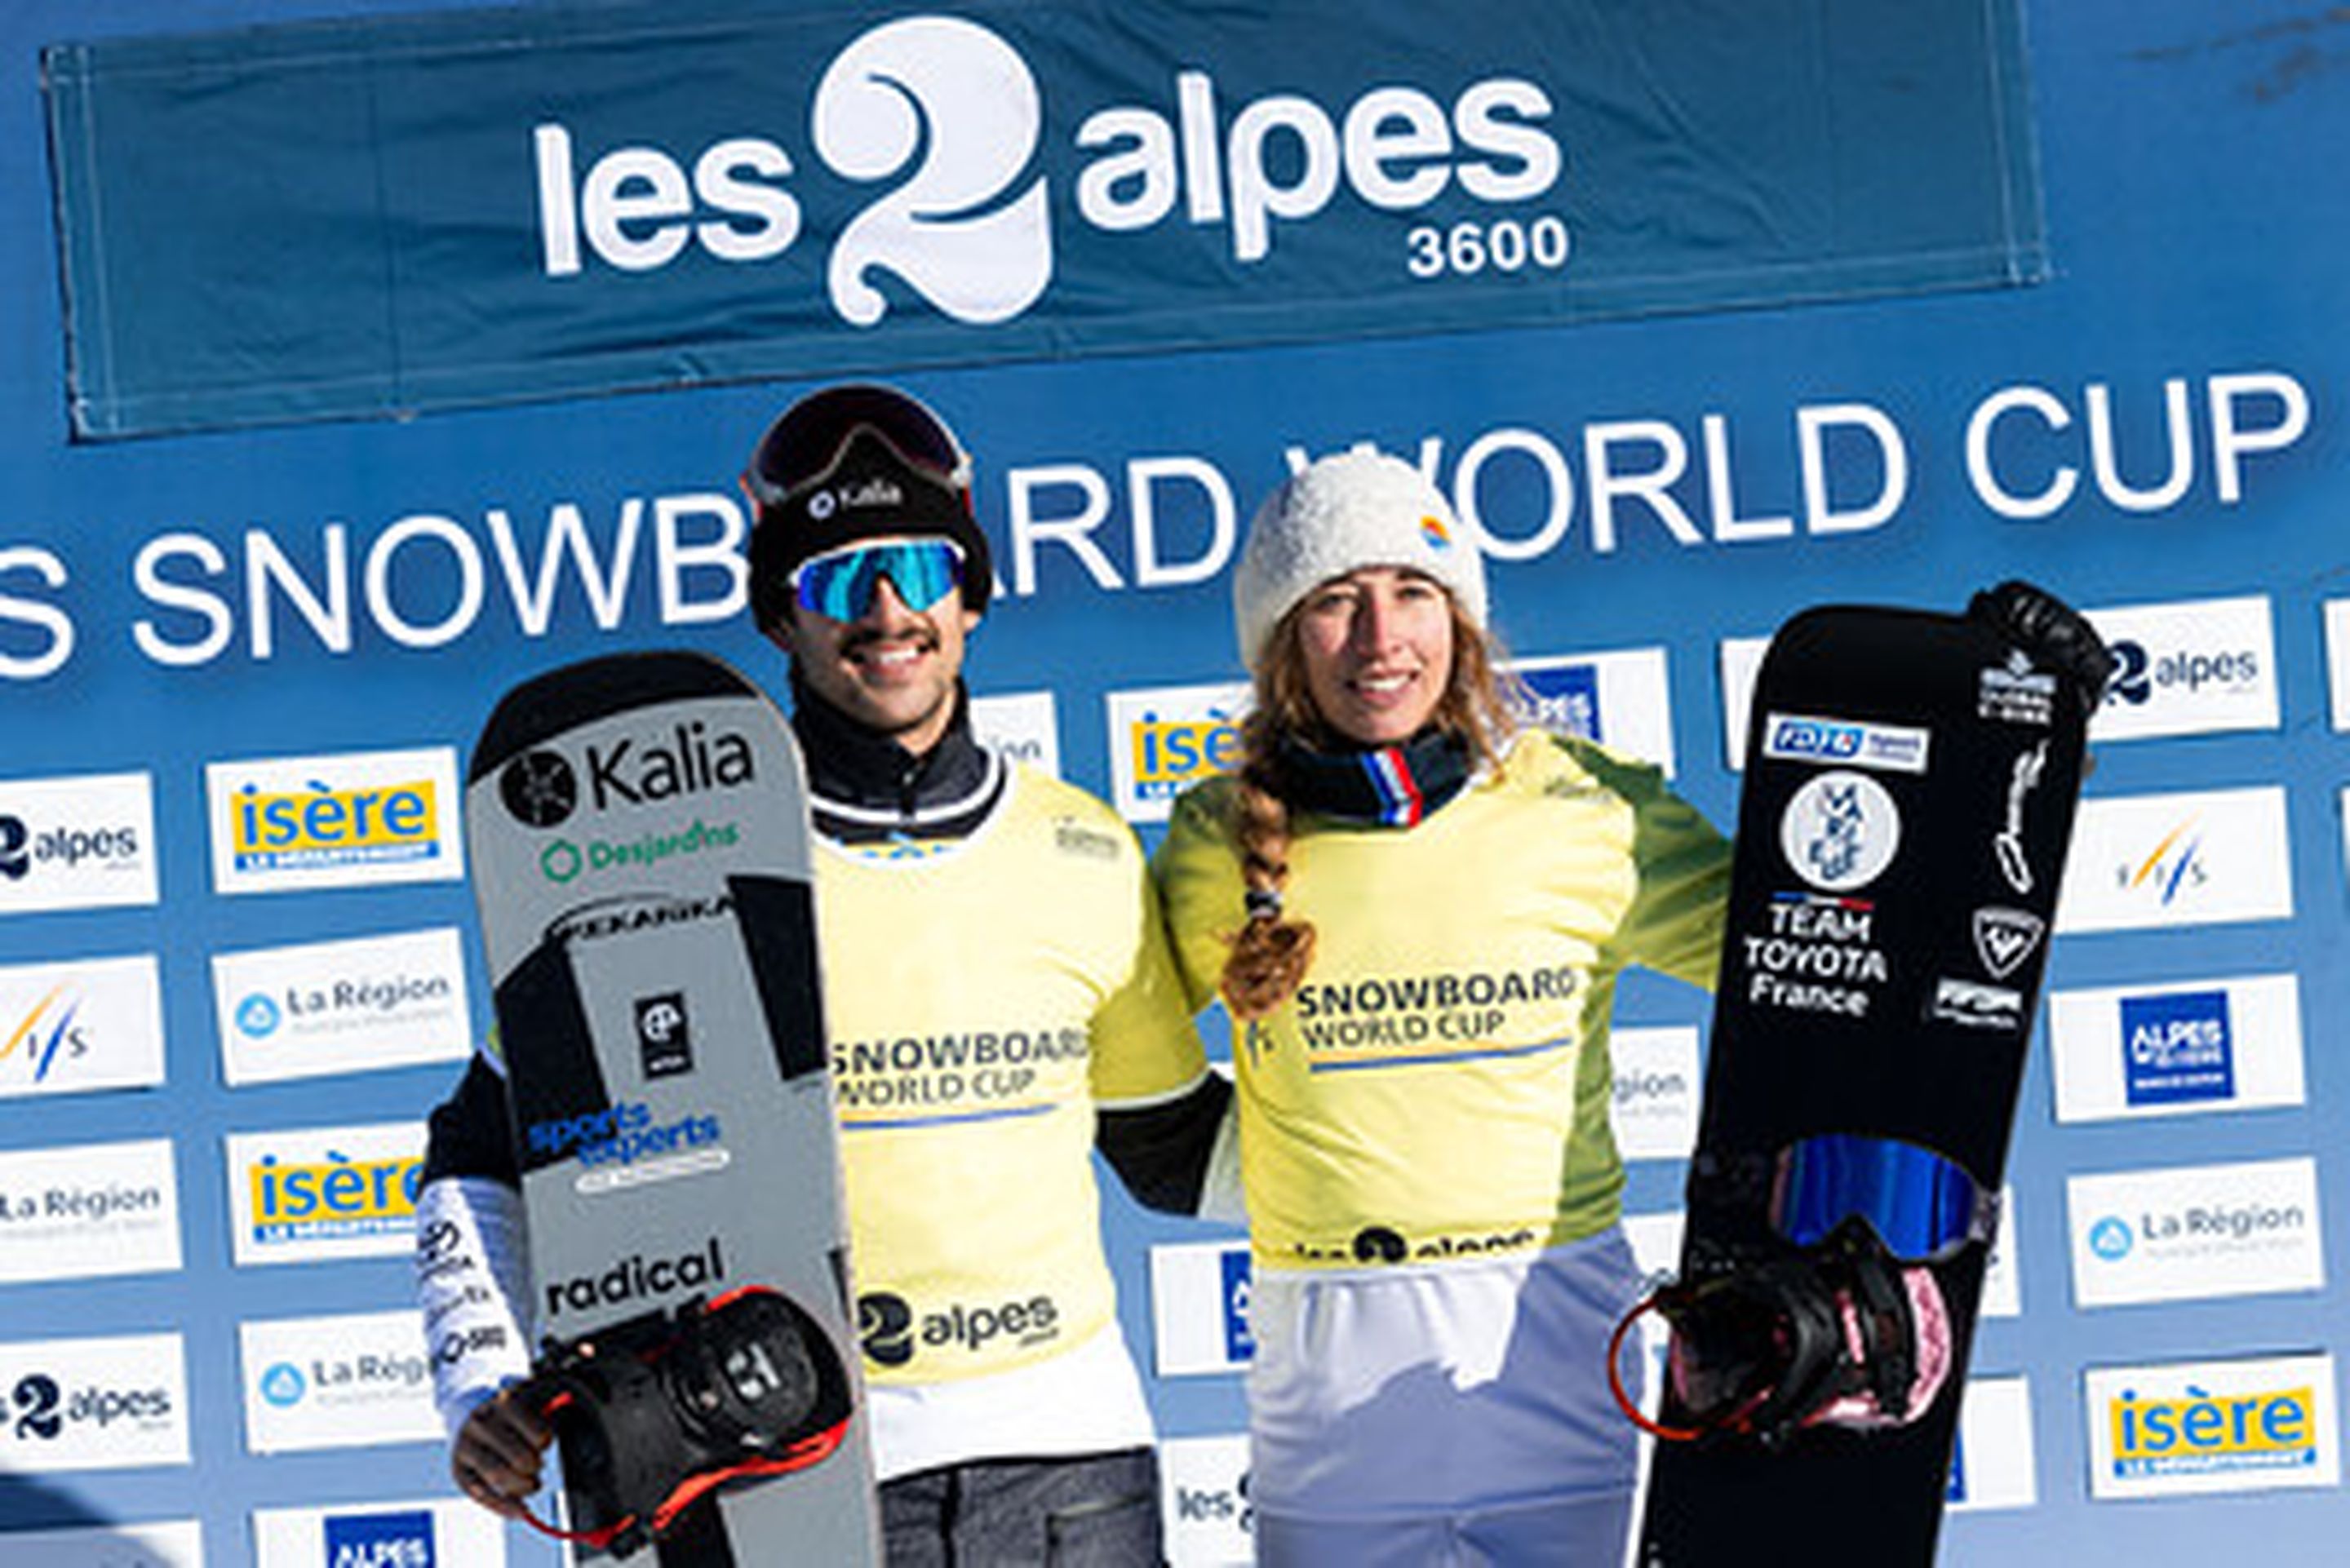 Grondin and Trespeuch, who won season openers in Les Deux Alpes